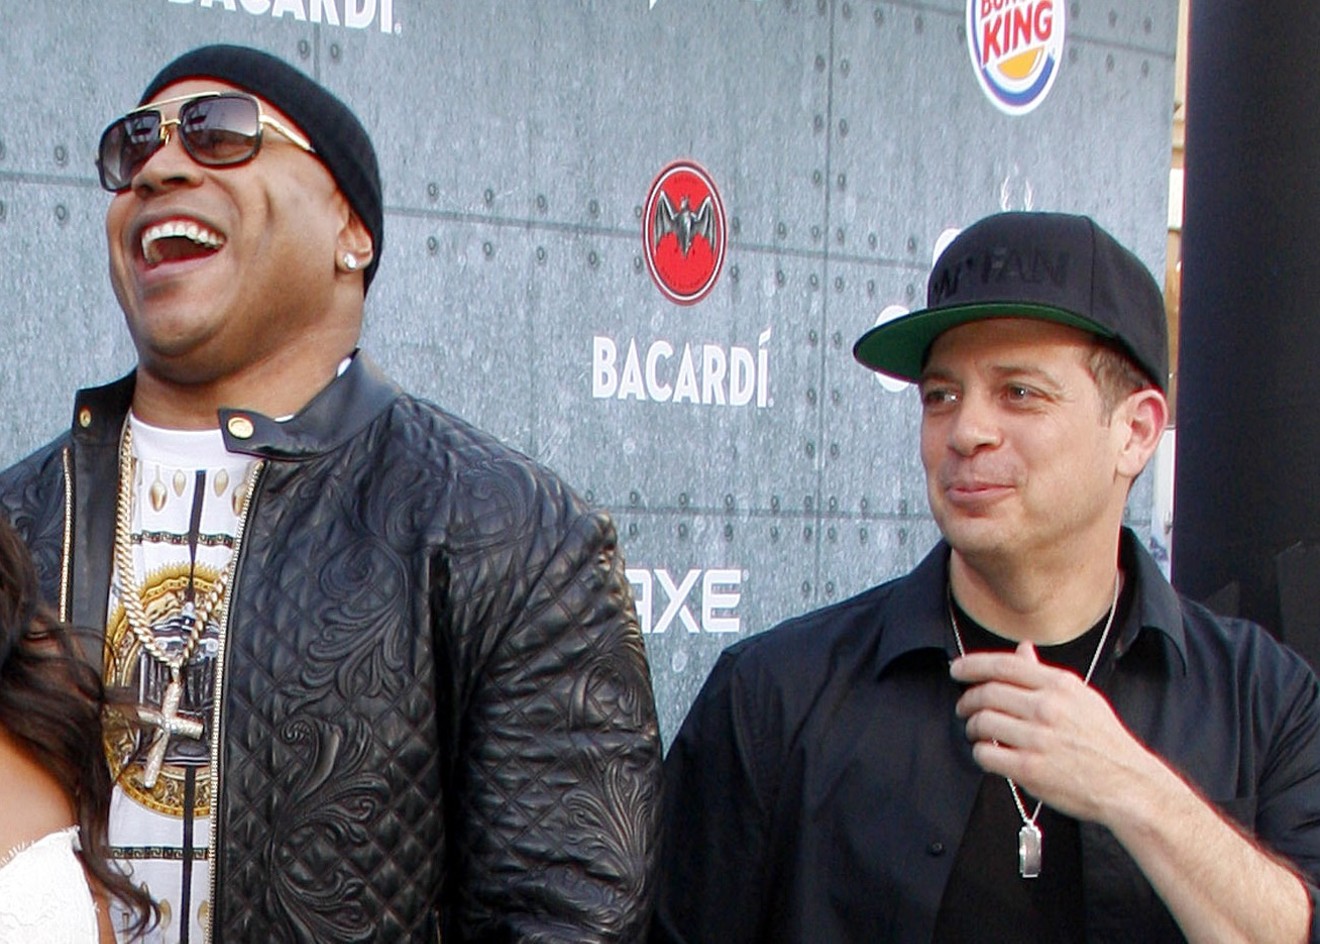 LL Cool J (left) with Z-Trip (right) at Spike TV's Guys Choice Awards in 2015.